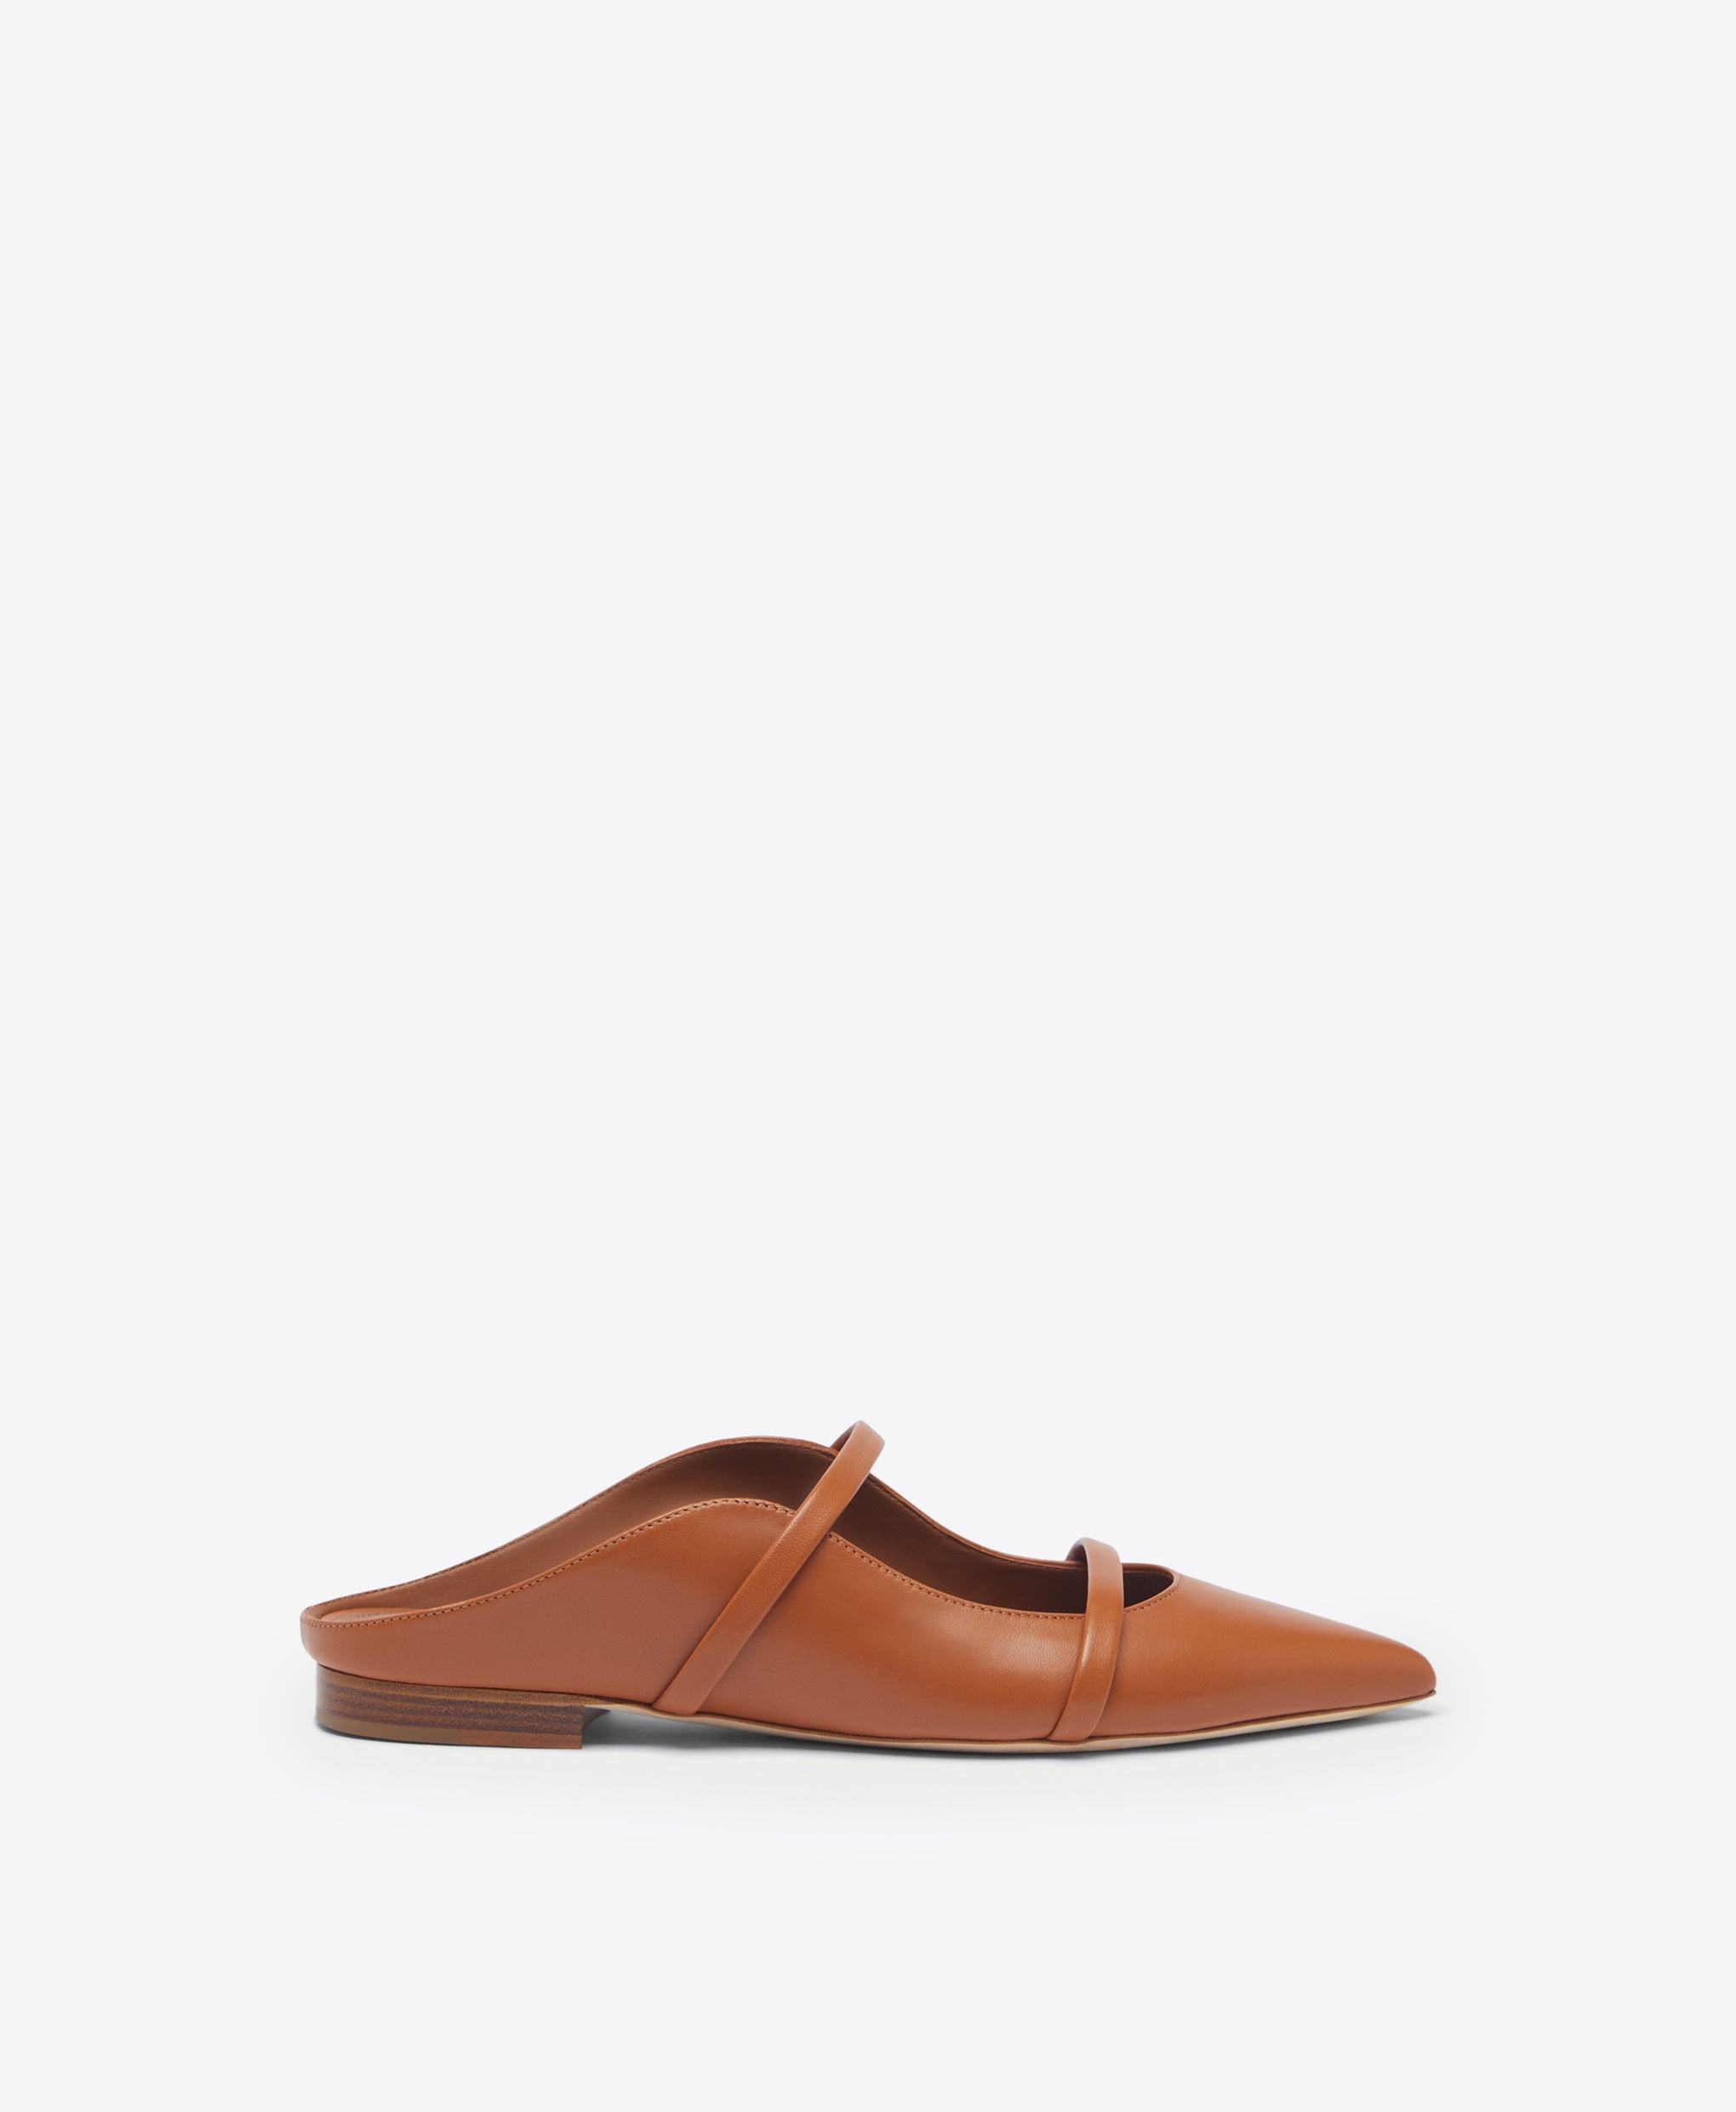 Malone Souliers Maureen Brown Leather Flat Mules